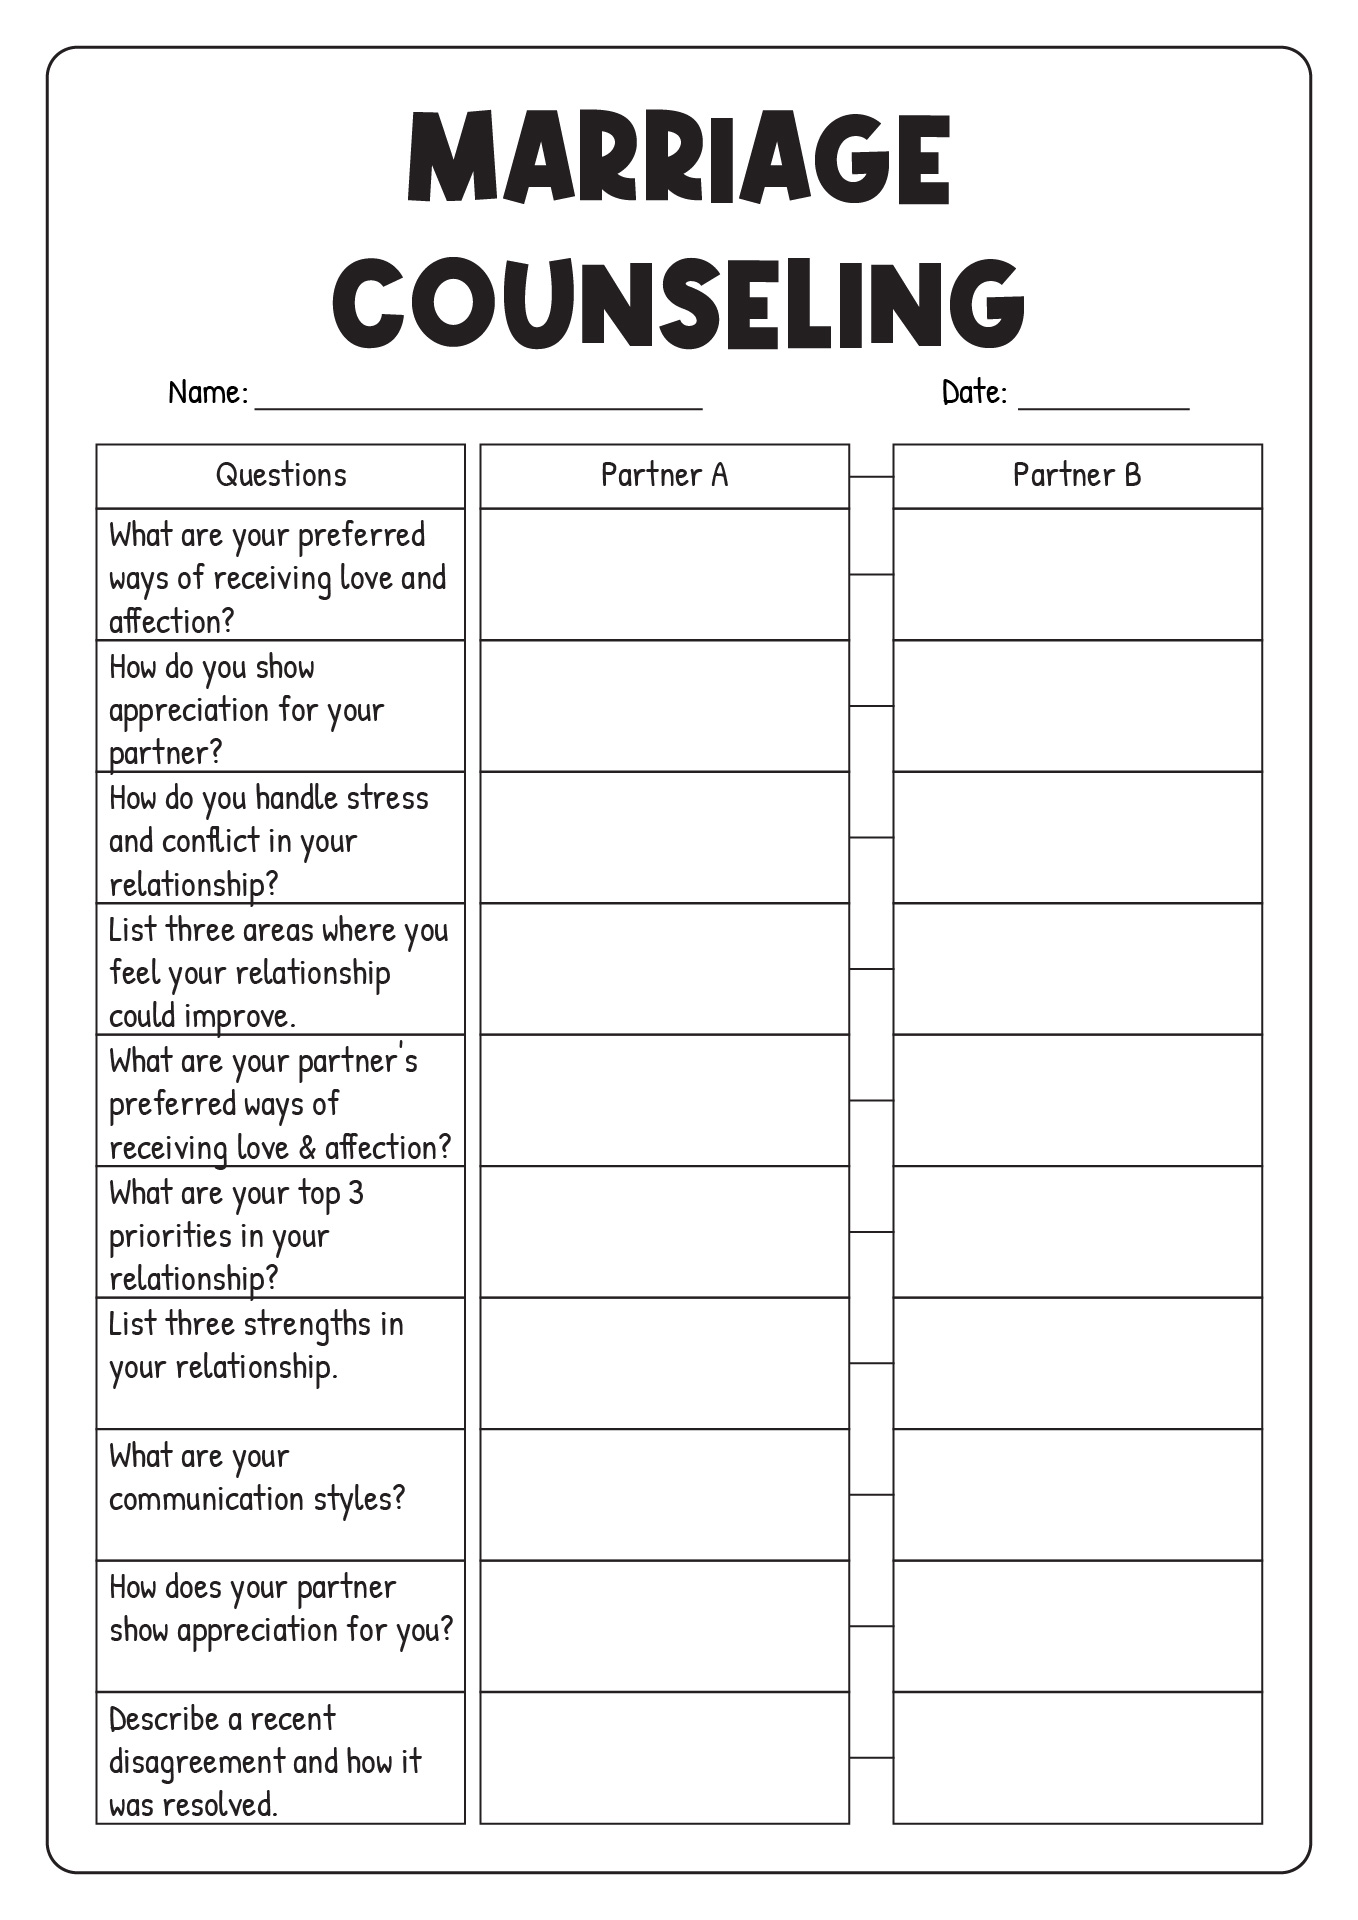 18 Best Images of Counseling For Teens Worksheets - All ...